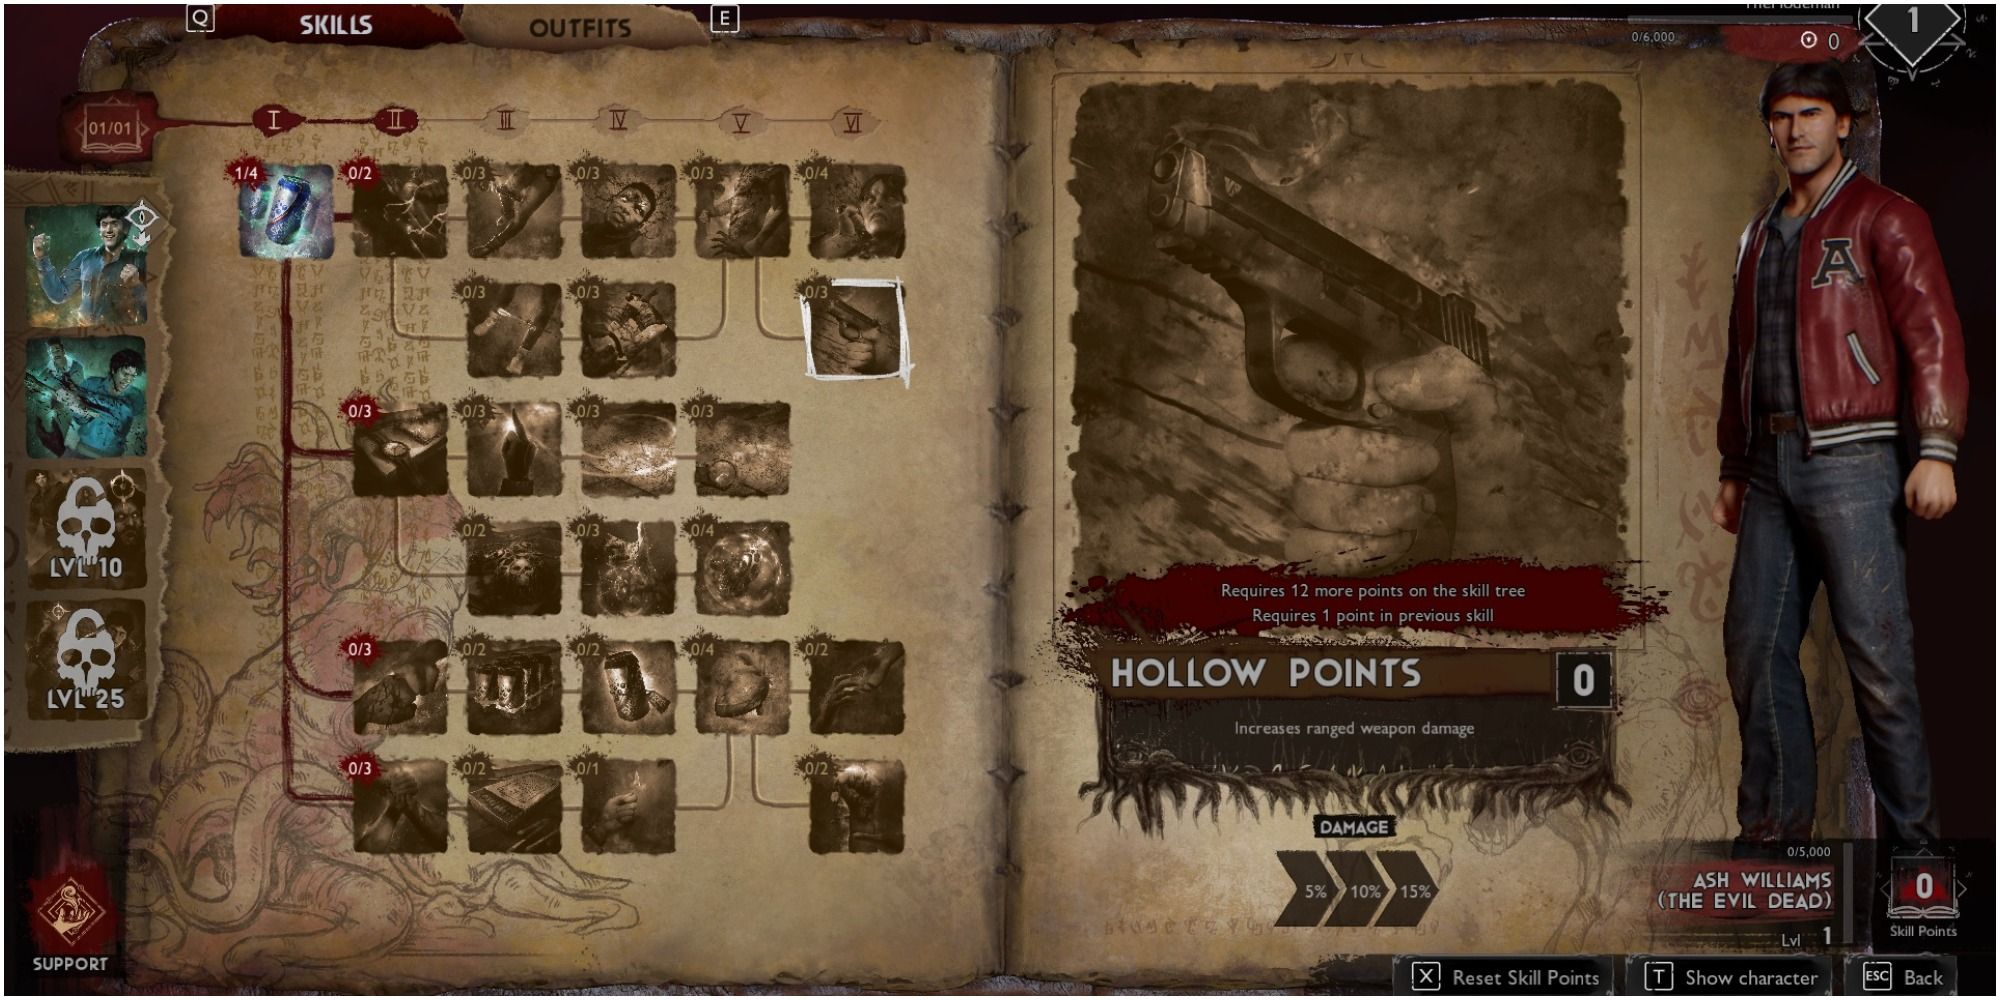 Evil Dead The Game Support Skill Hollow Points Description